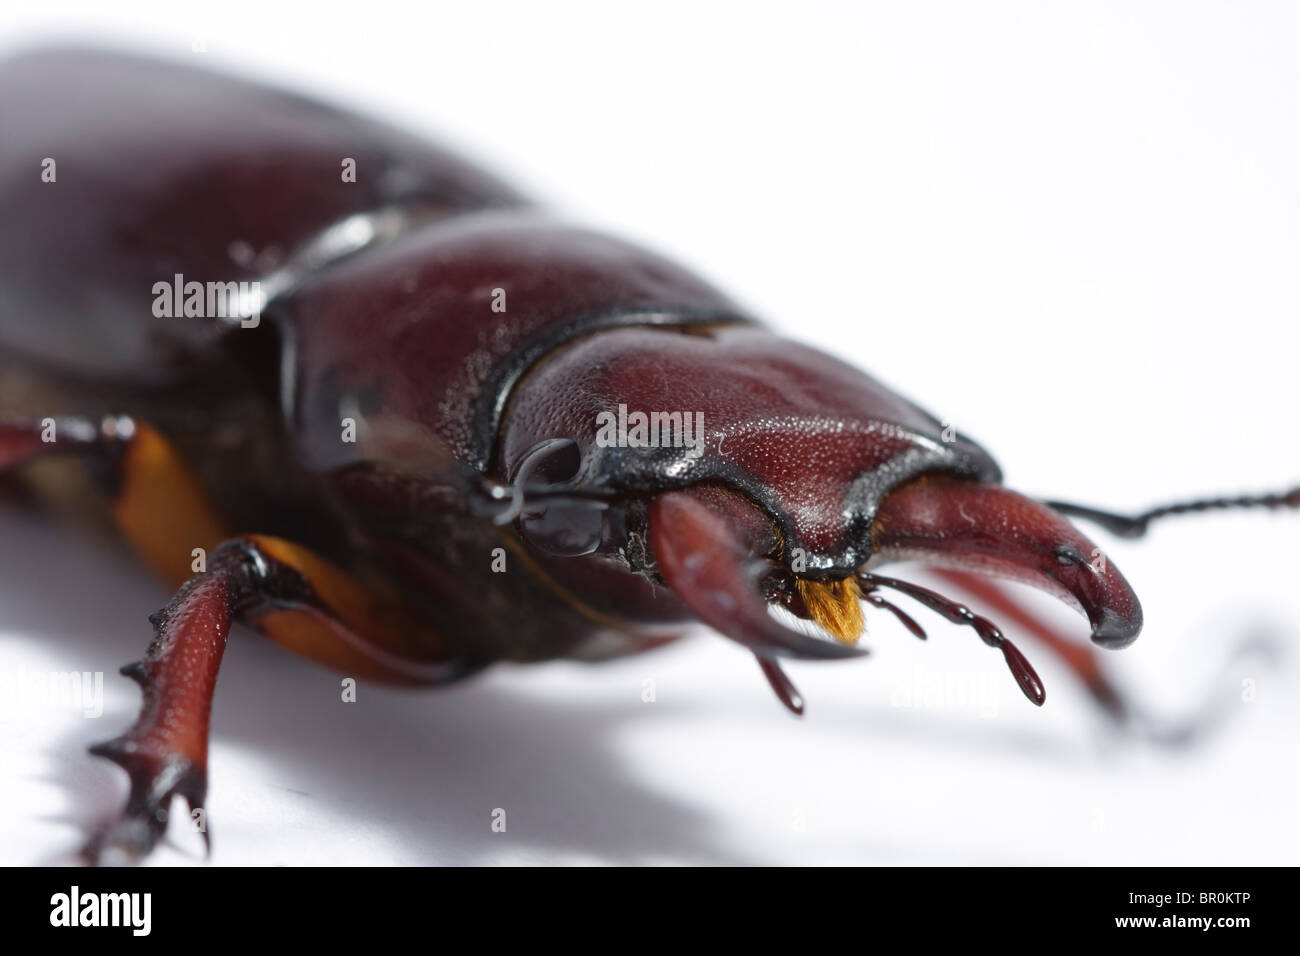 A close-up of a male reddish-brown stag beetle (Lucanus capreolus) on a white background. Stock Photo